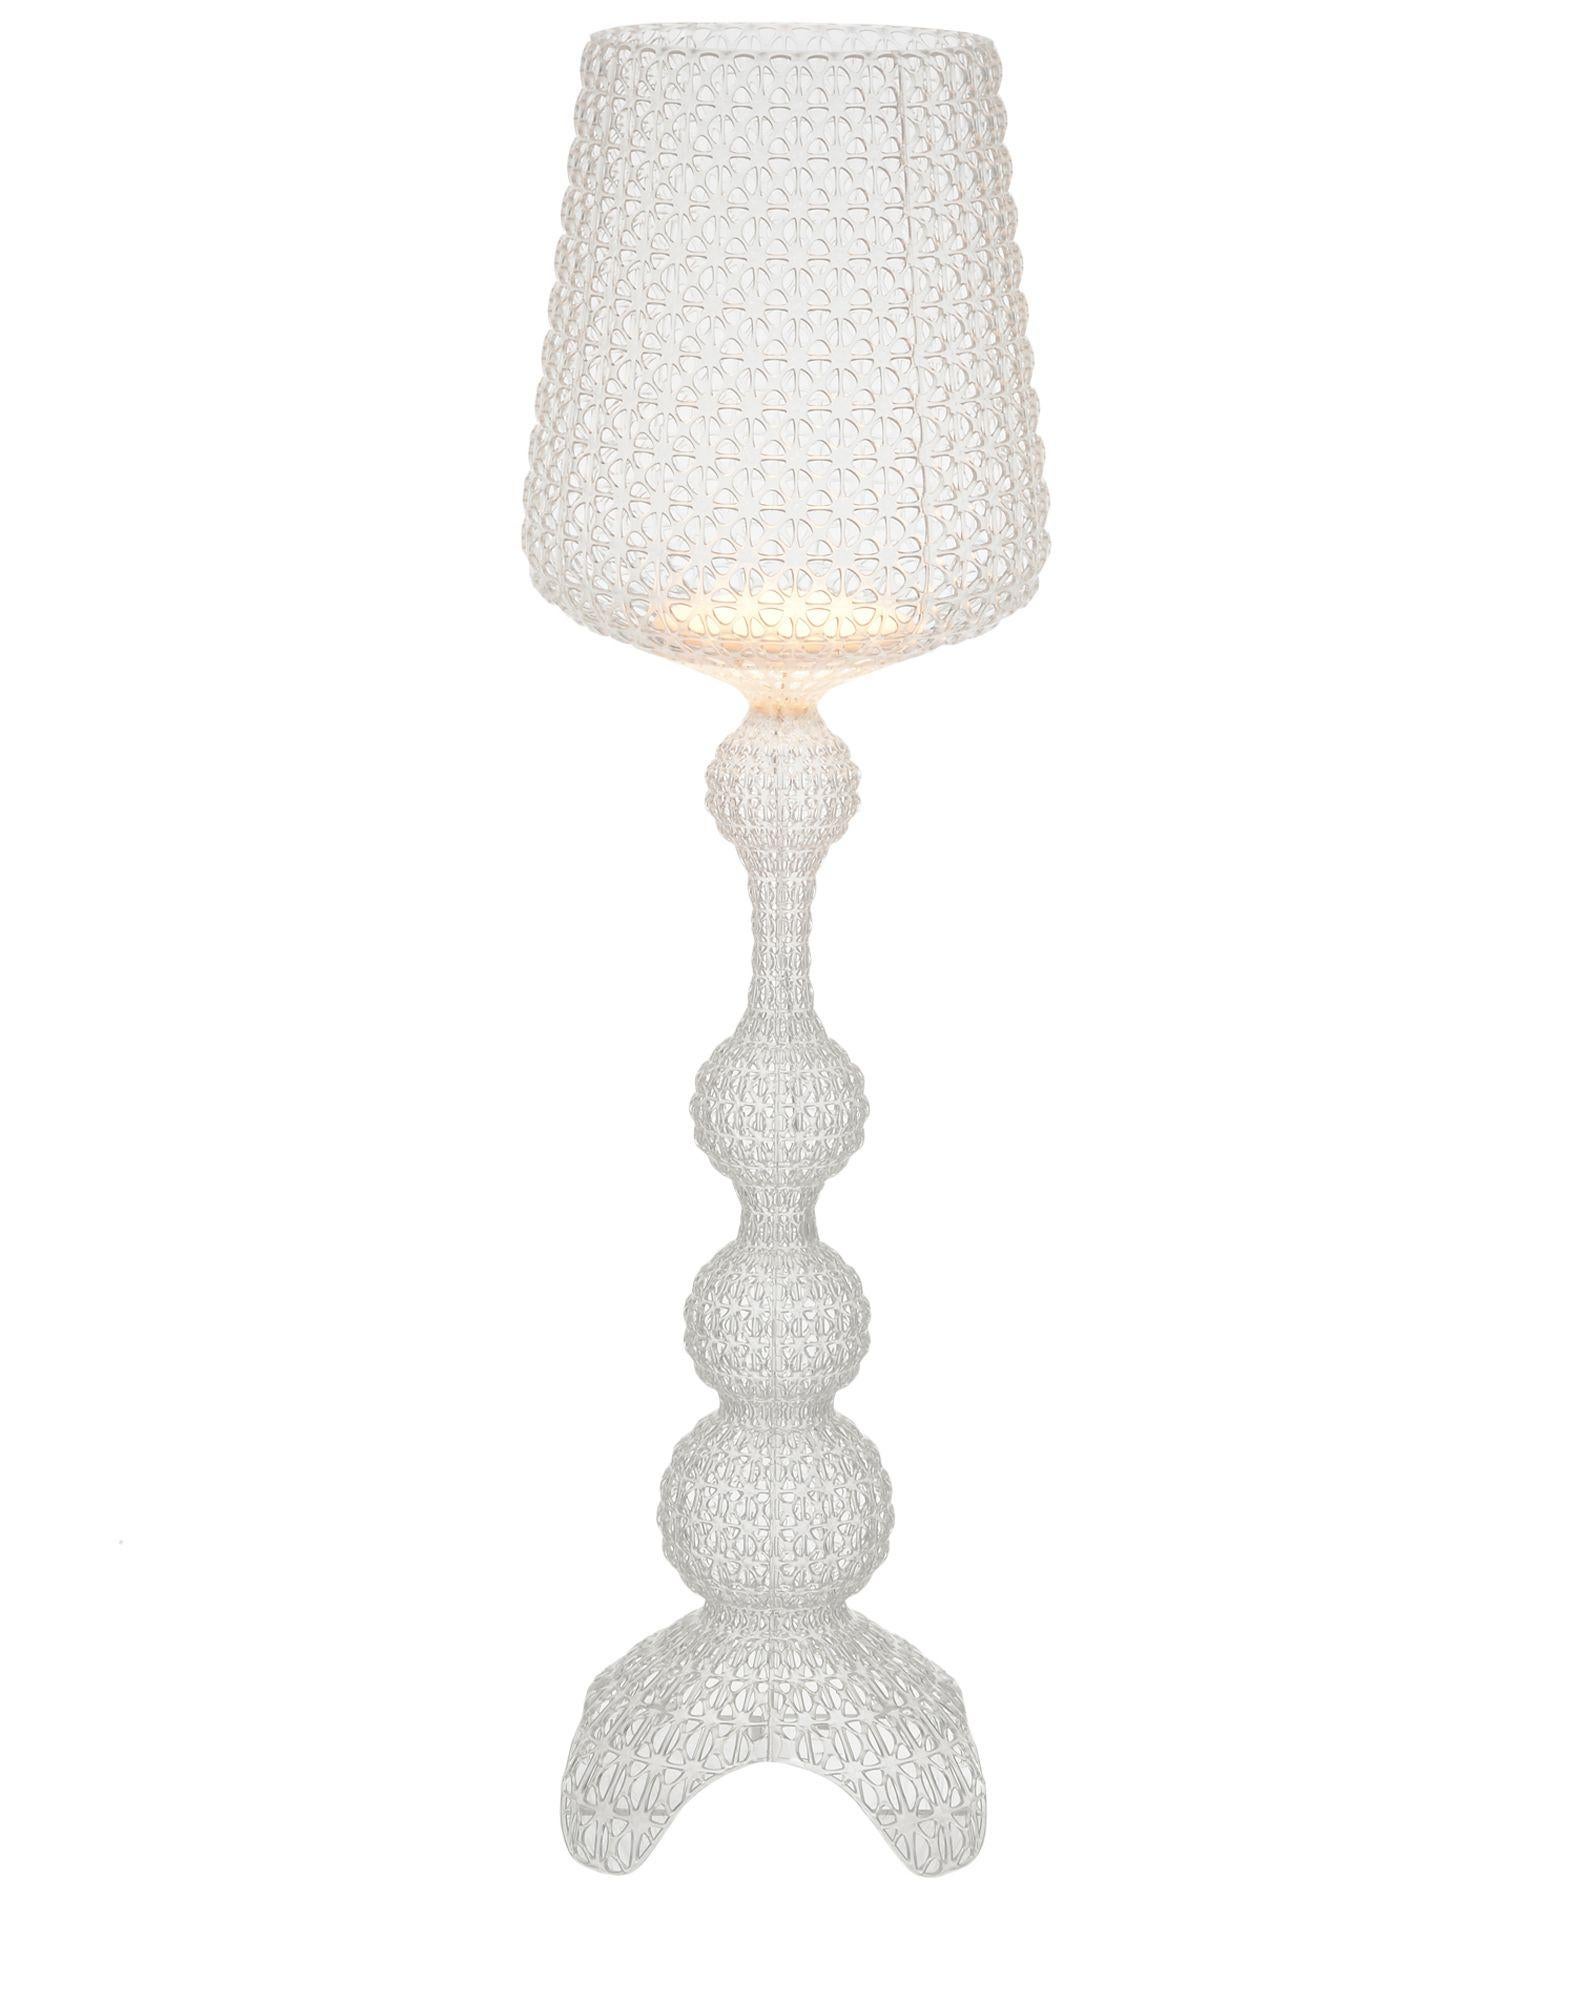 The Kabuki floor lamp is injection molded. The sophisticated injection technology used makes it possible to create a woven structure similar to lace with a unique perforated surface through which the light is diffused.

Dimensions: Height 65.33